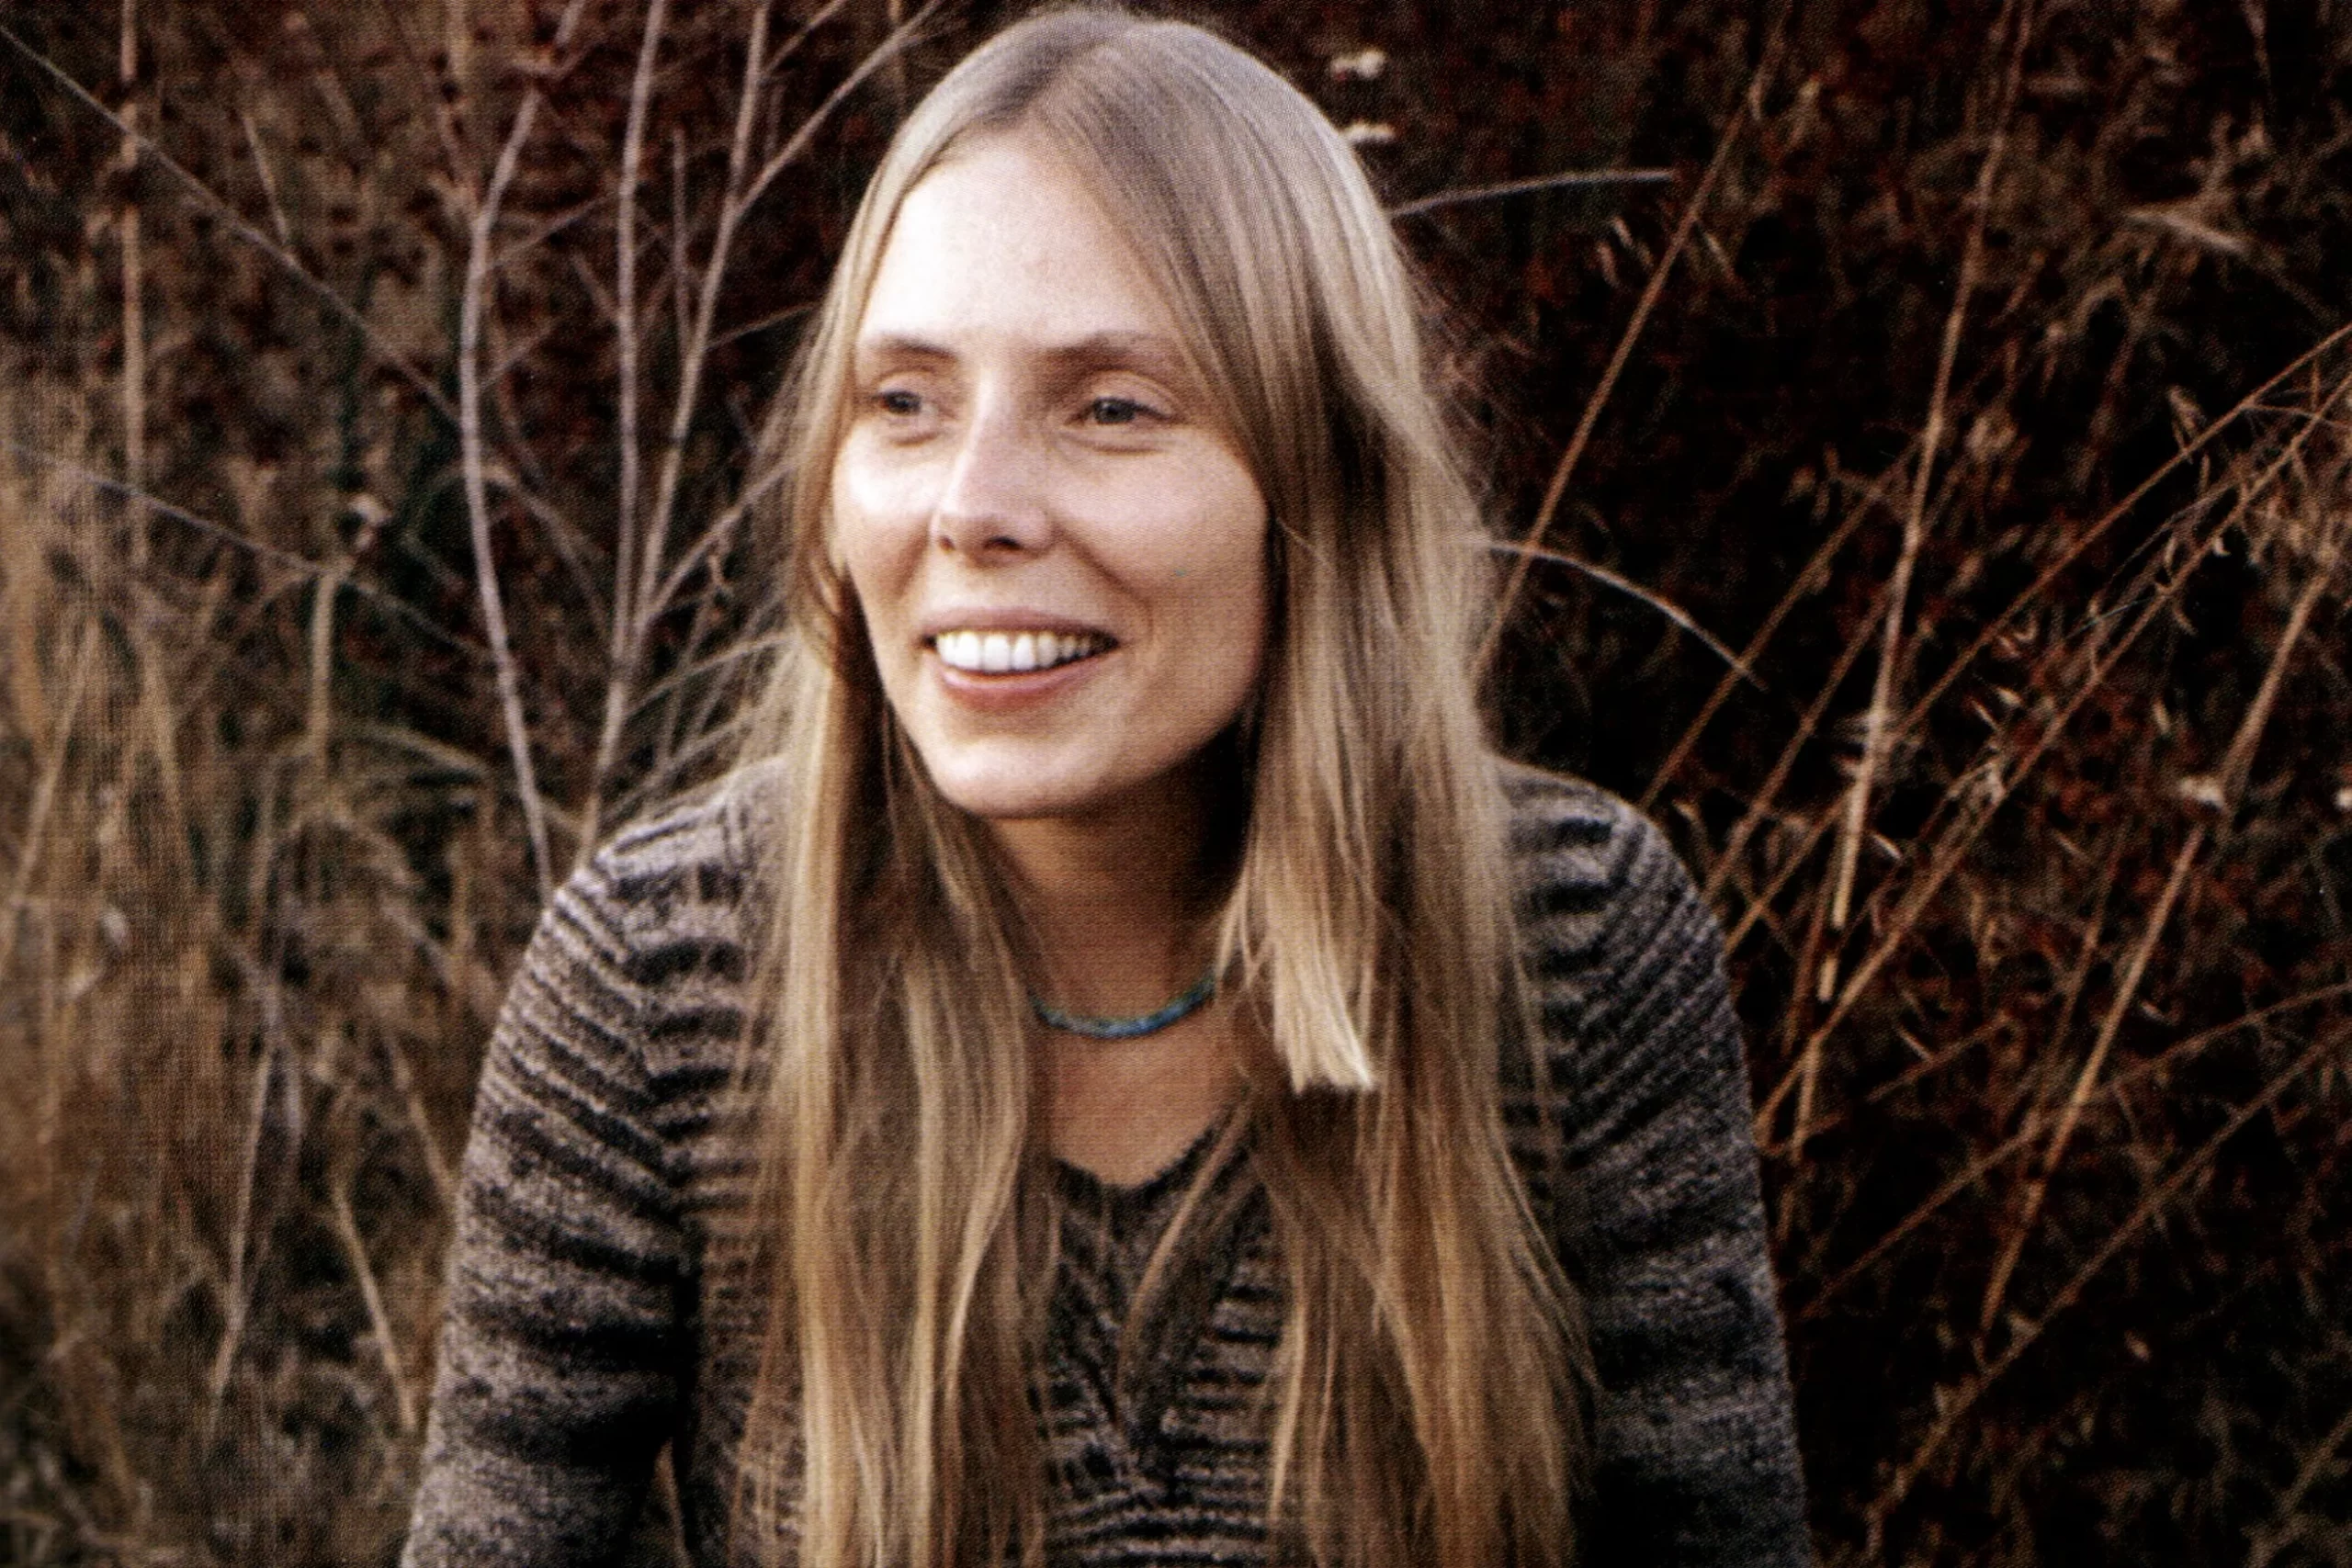 How old is Joni Mitchell, and what is her real name